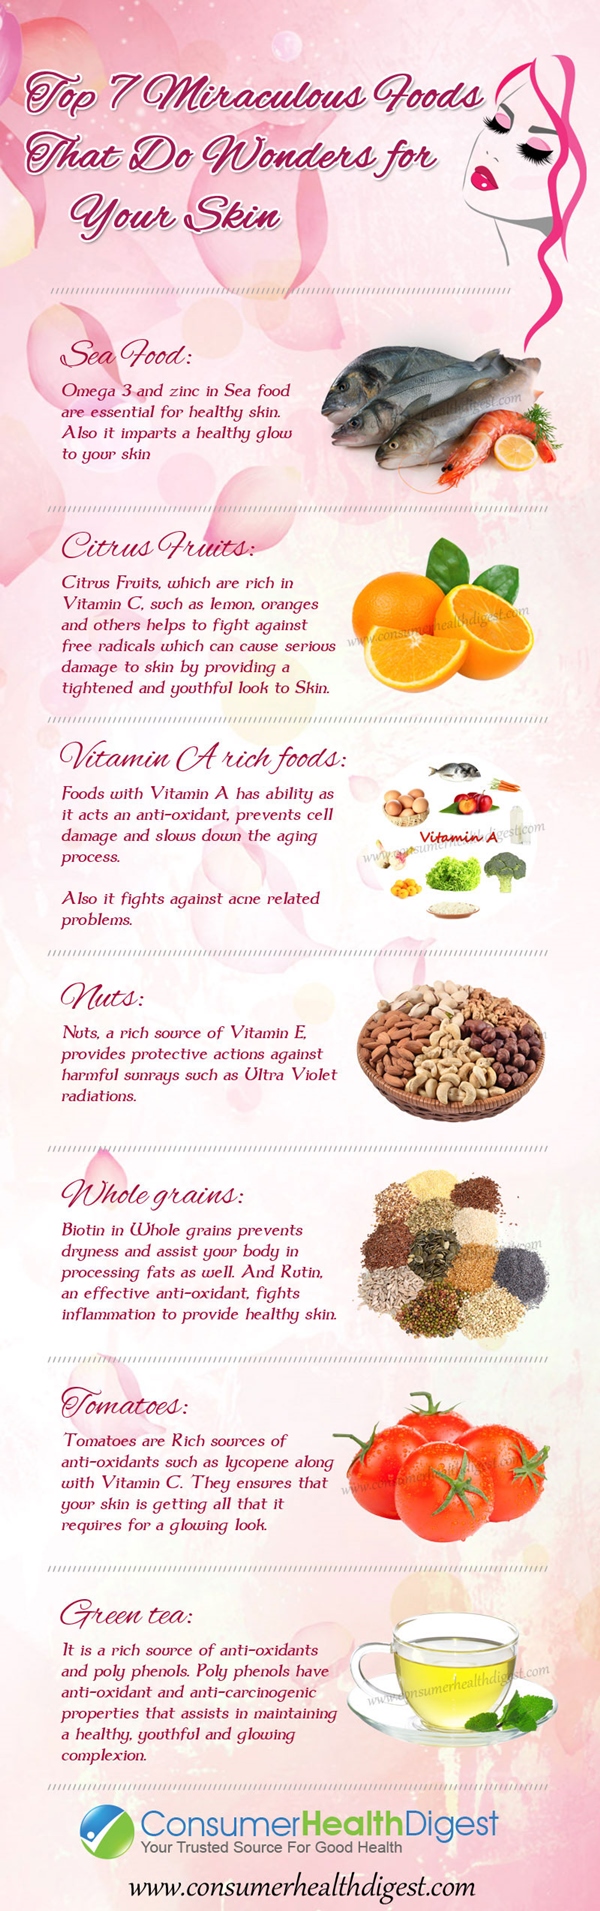 Foods for health